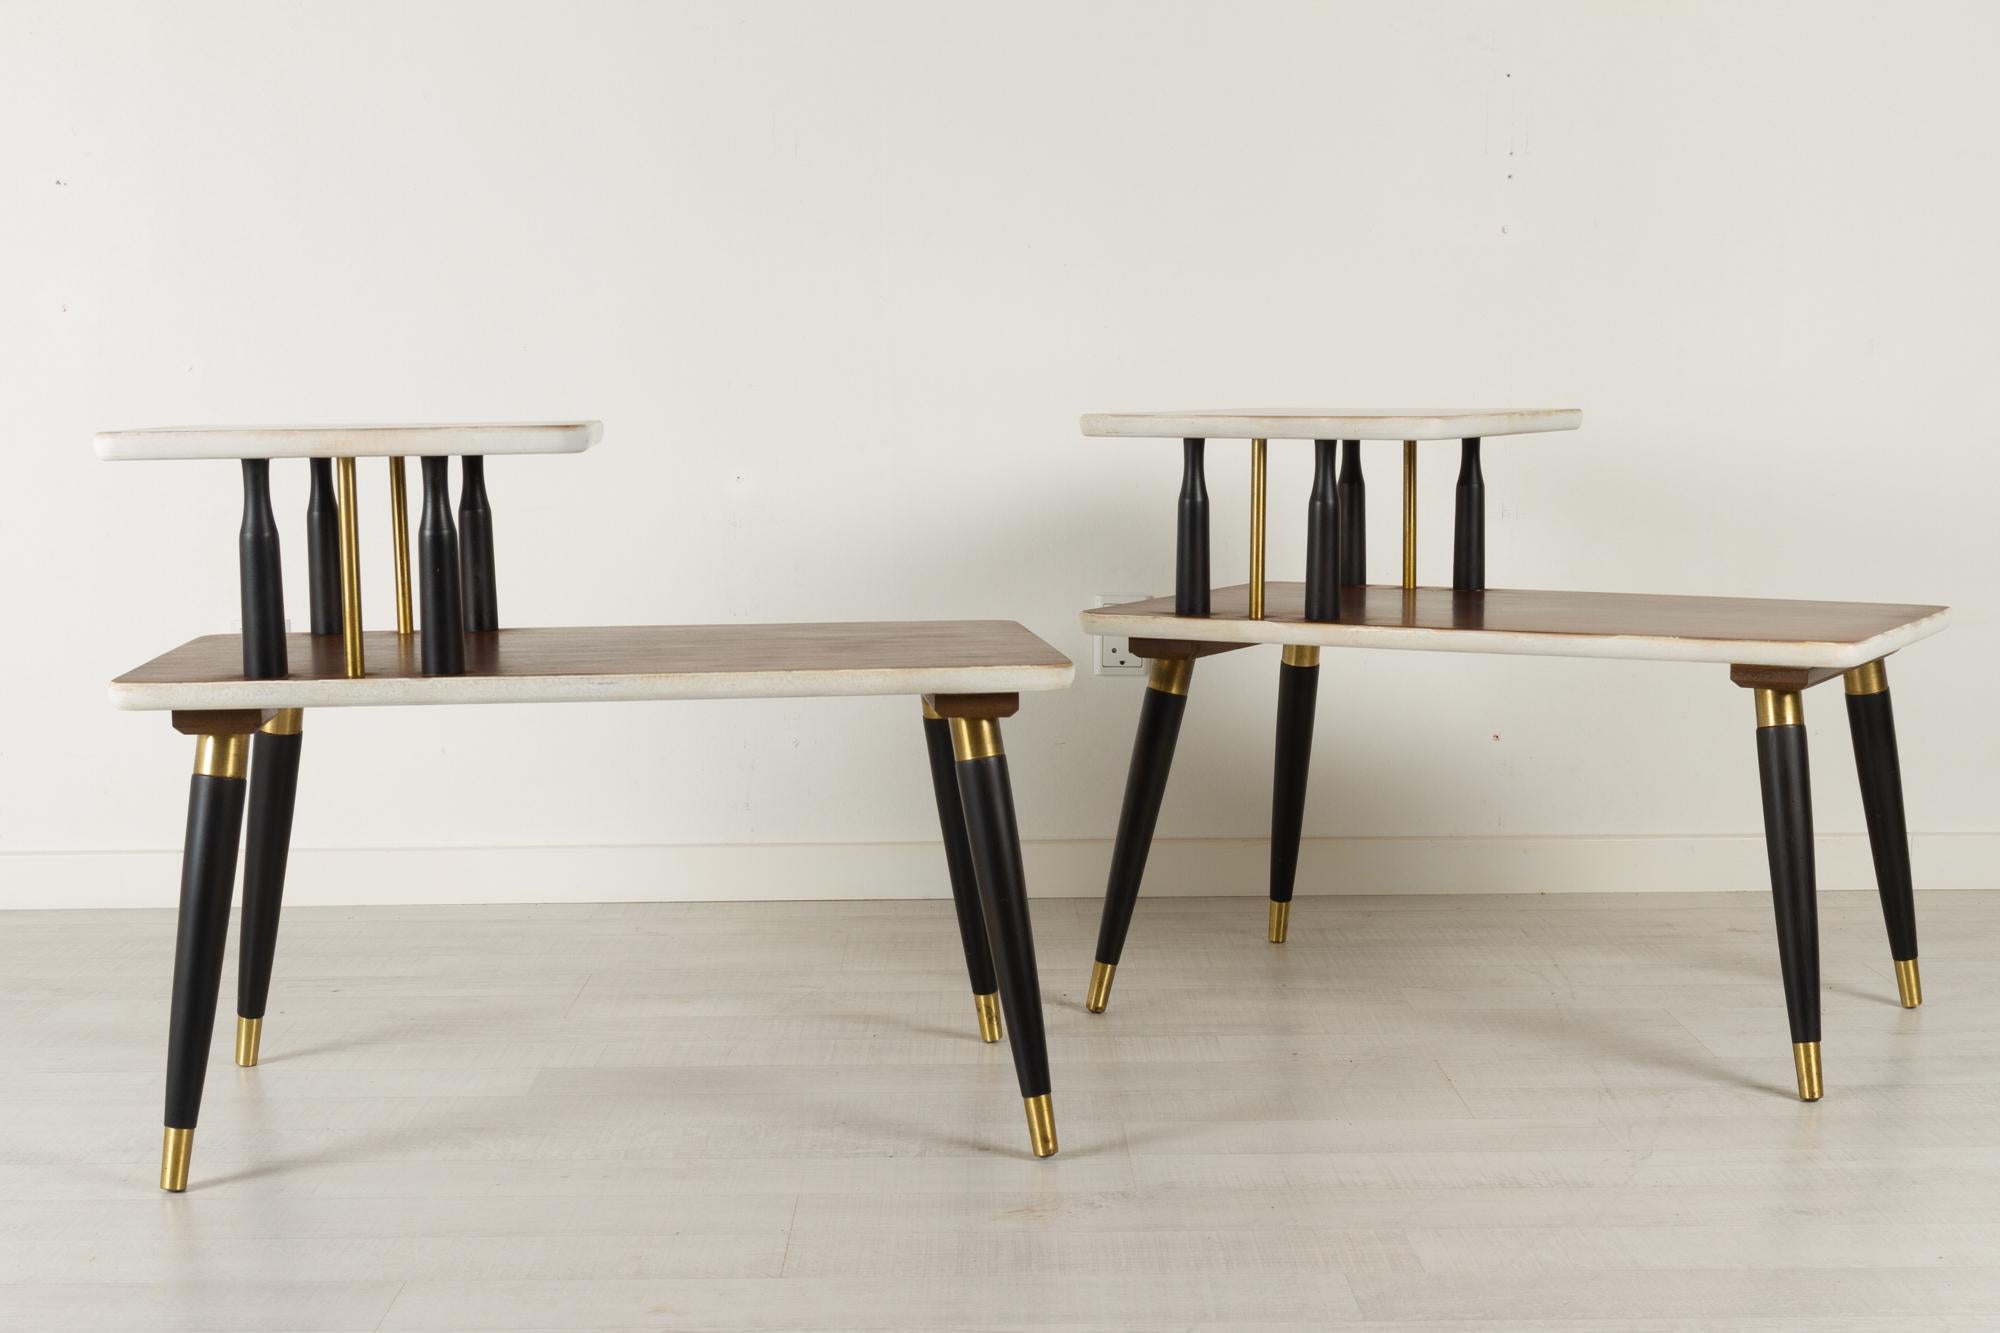 Vintage Mid-Century Modern Italian bedside tables 1960s, Set of 2.

Very elegant pair of tiered tables with teak tops and ebonized legs with brass details. Top tier resting on pillars of ebonized wood and brass rods. Round tapered legs with brass